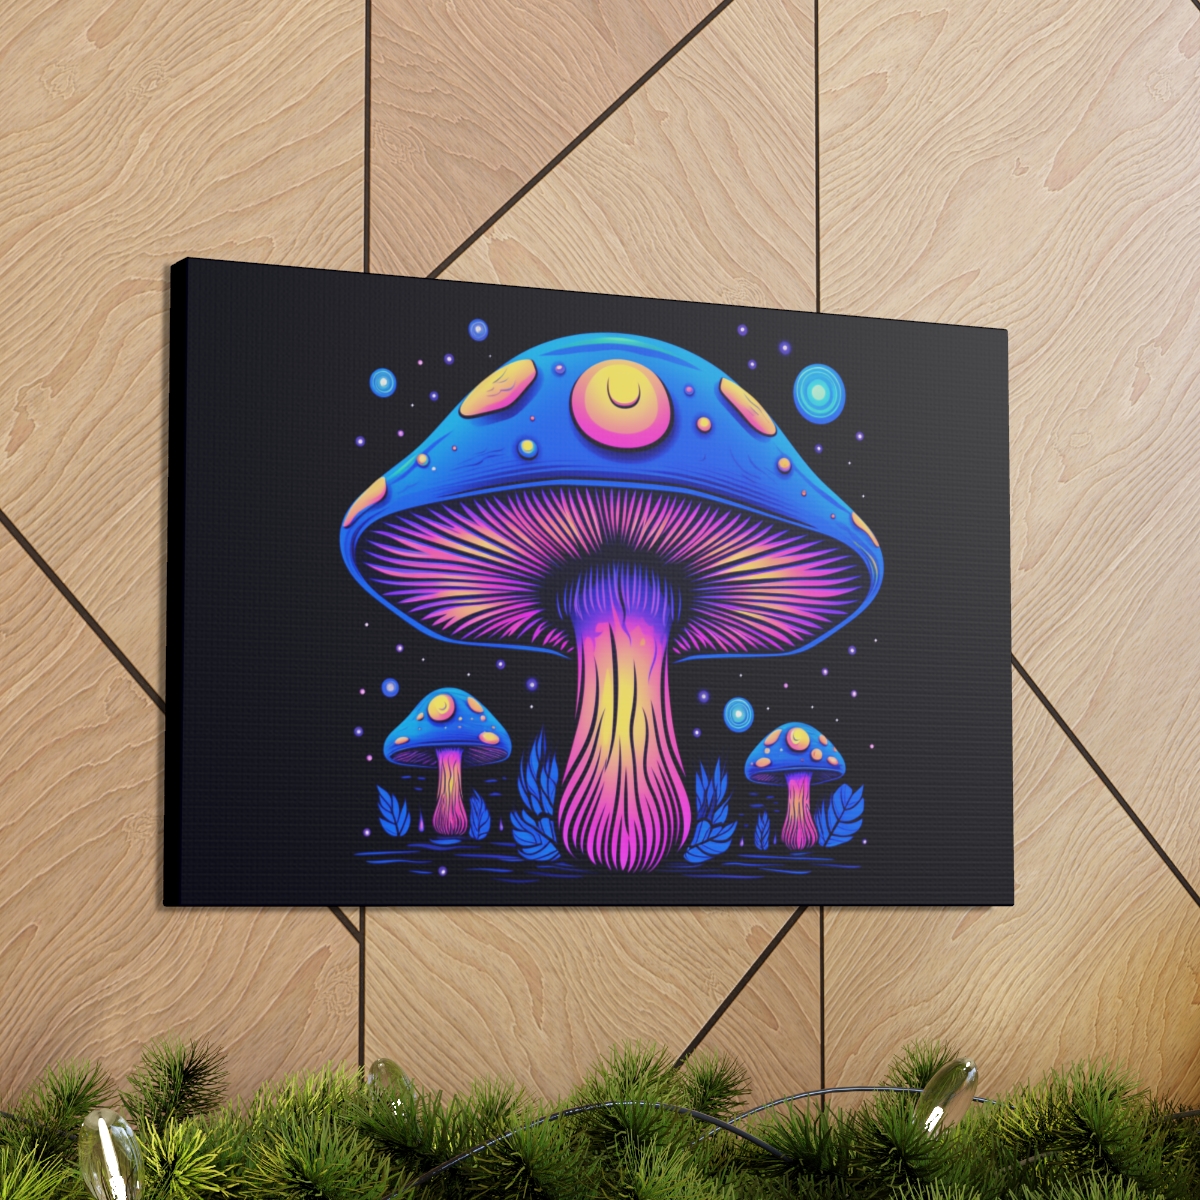 Trippy Psychedelic Shroom Art: Little Nuggets of Wisdom